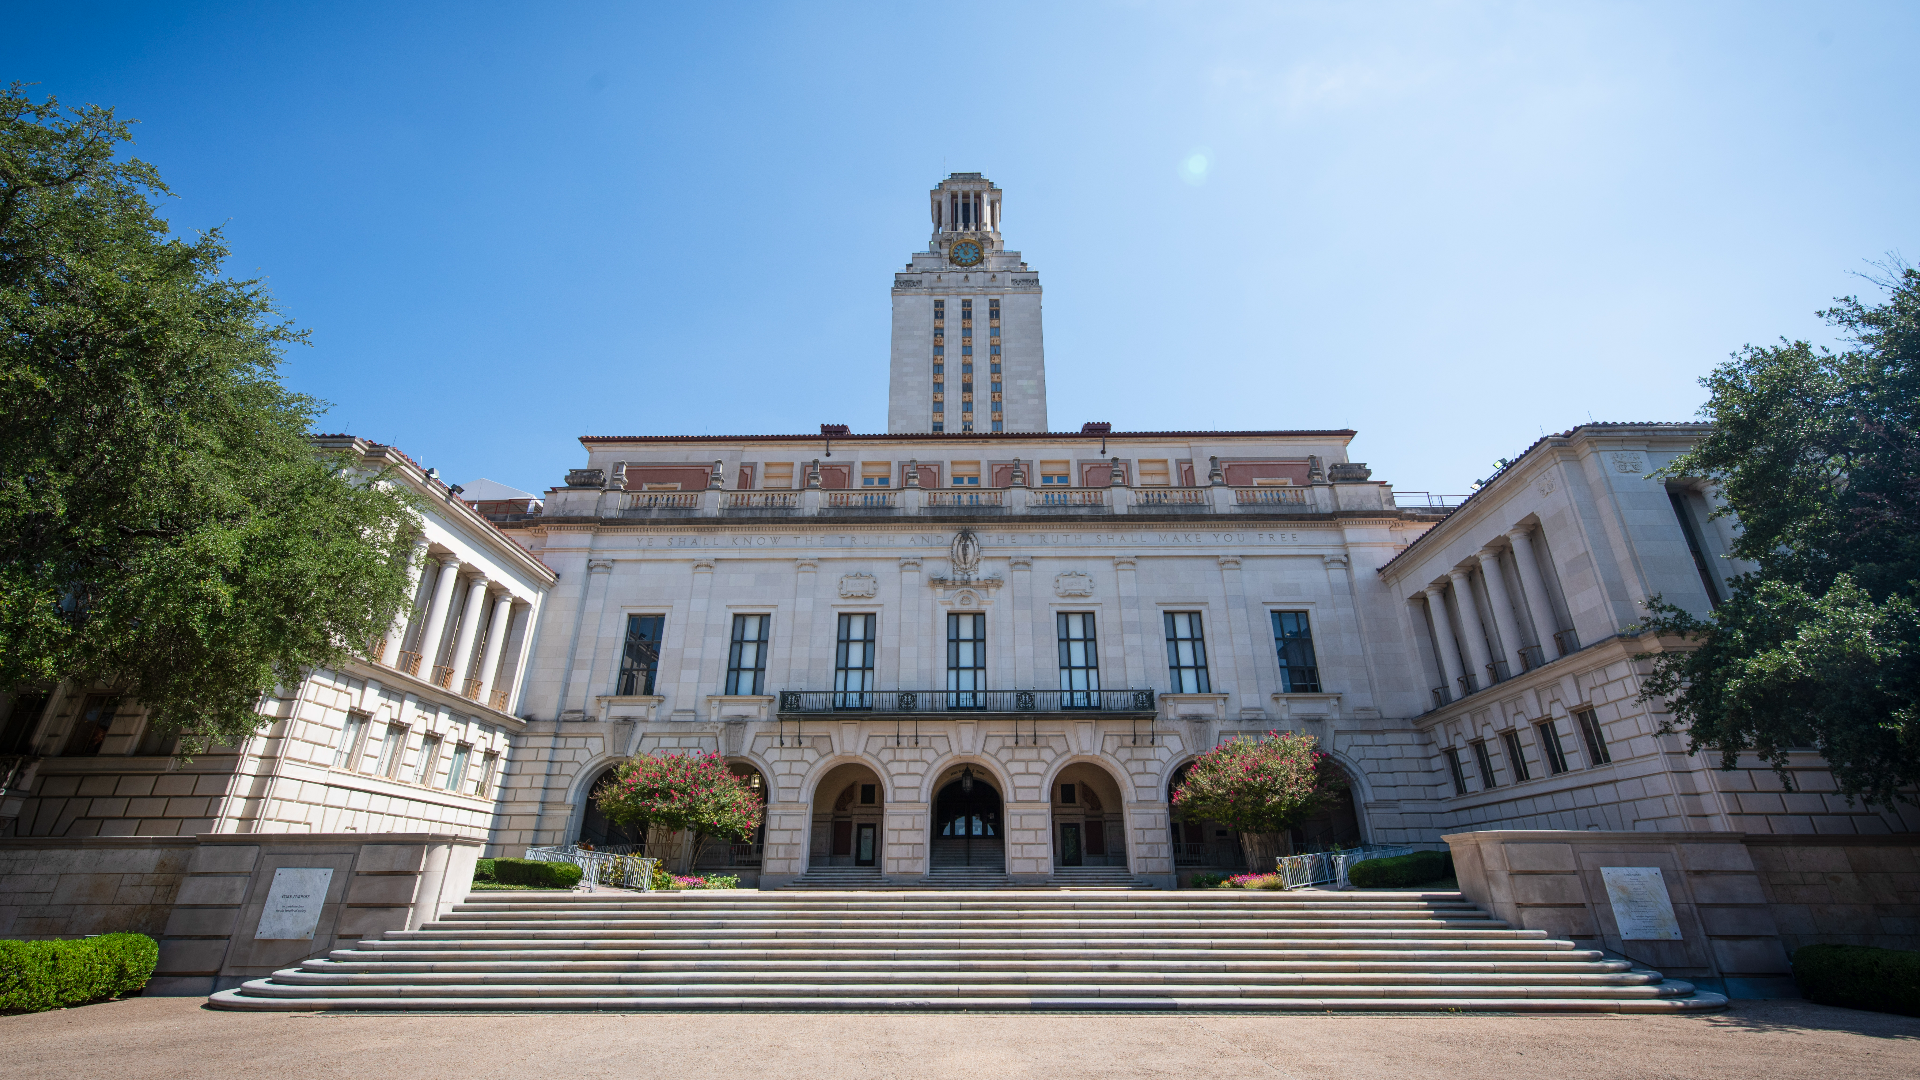 A hearing about the law – which bans diversity, equity and inclusion (DEI) programs on college campuses throughout Texas – is set for Tuesday.